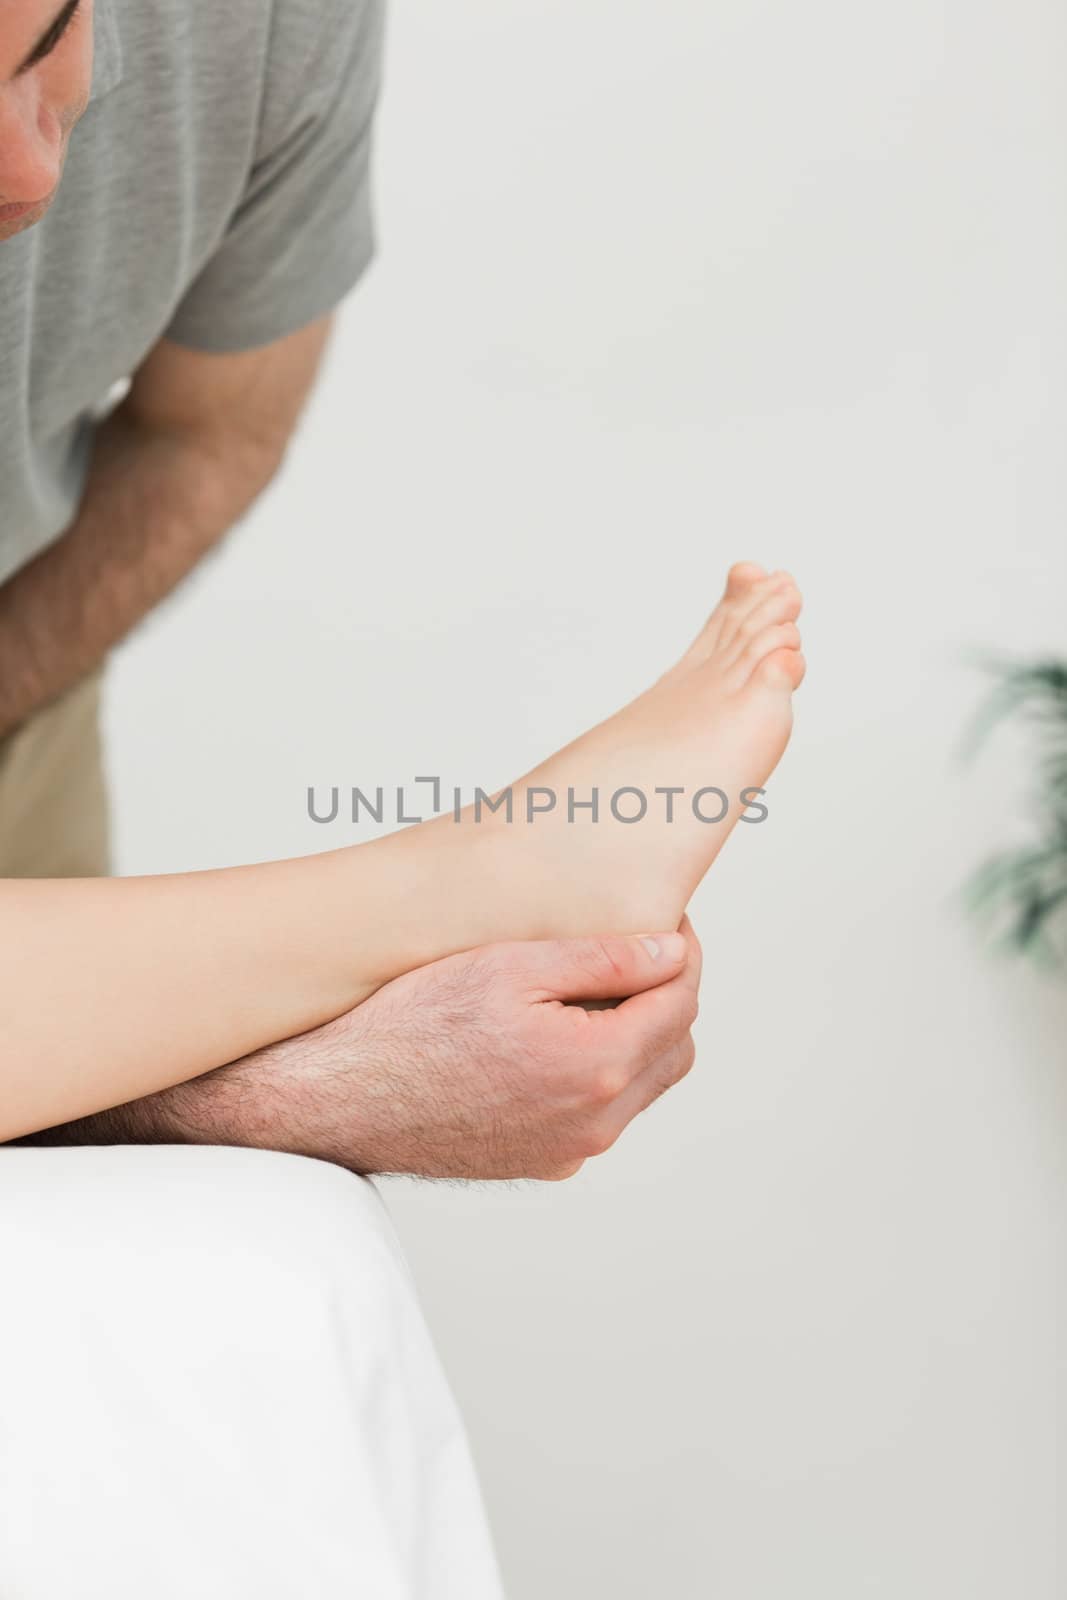 Podiatrist examining the foot of his patient in a room